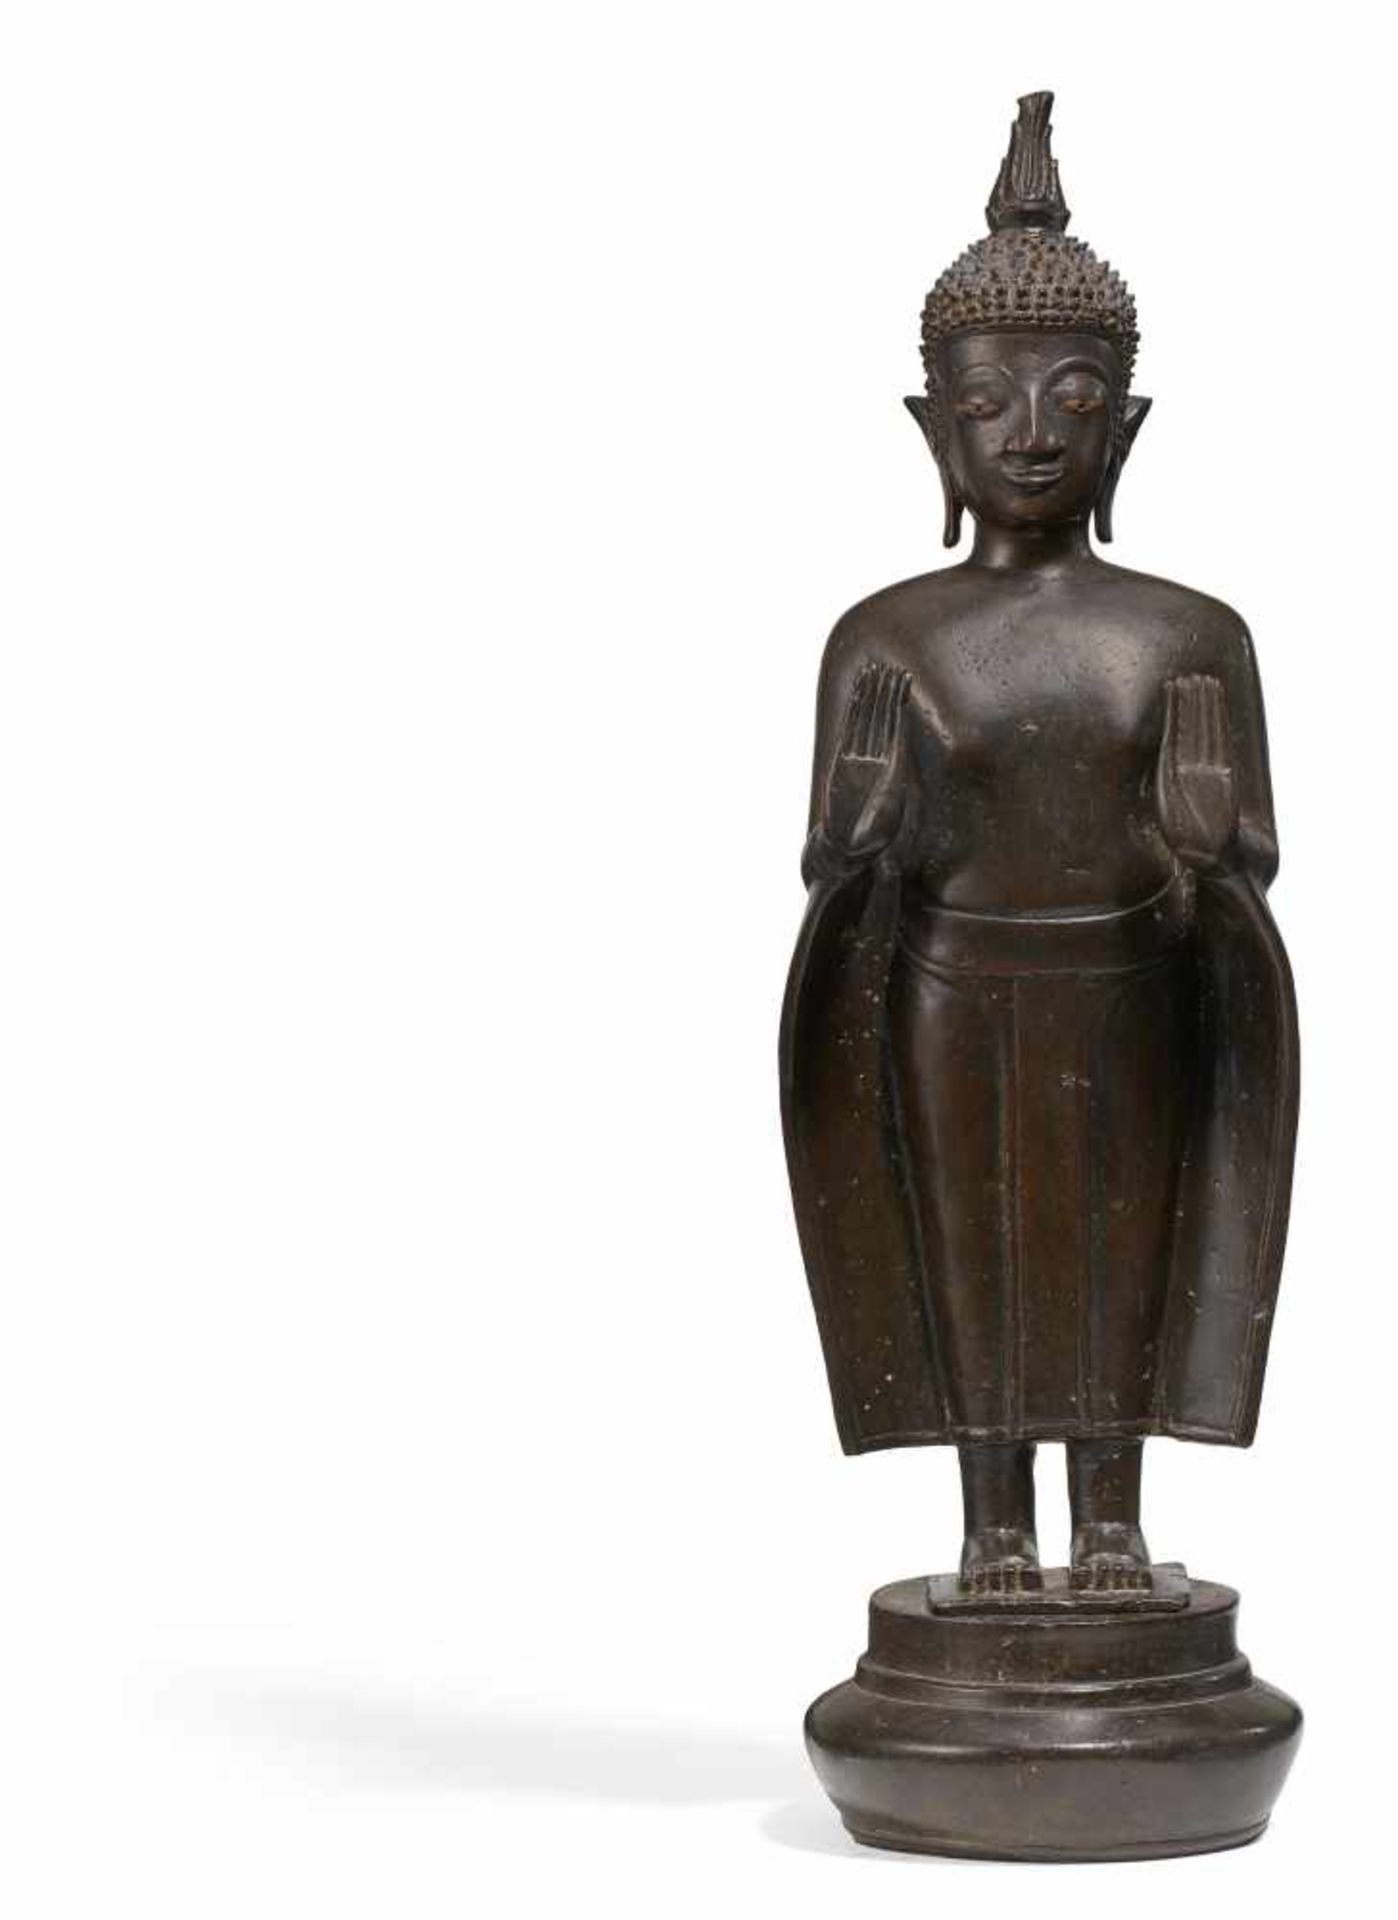 STANDING BUDDHA IN PHA BANG STYLE. Laos. 18th/19th c. Bronze with dark patina. Eyes inlaid in